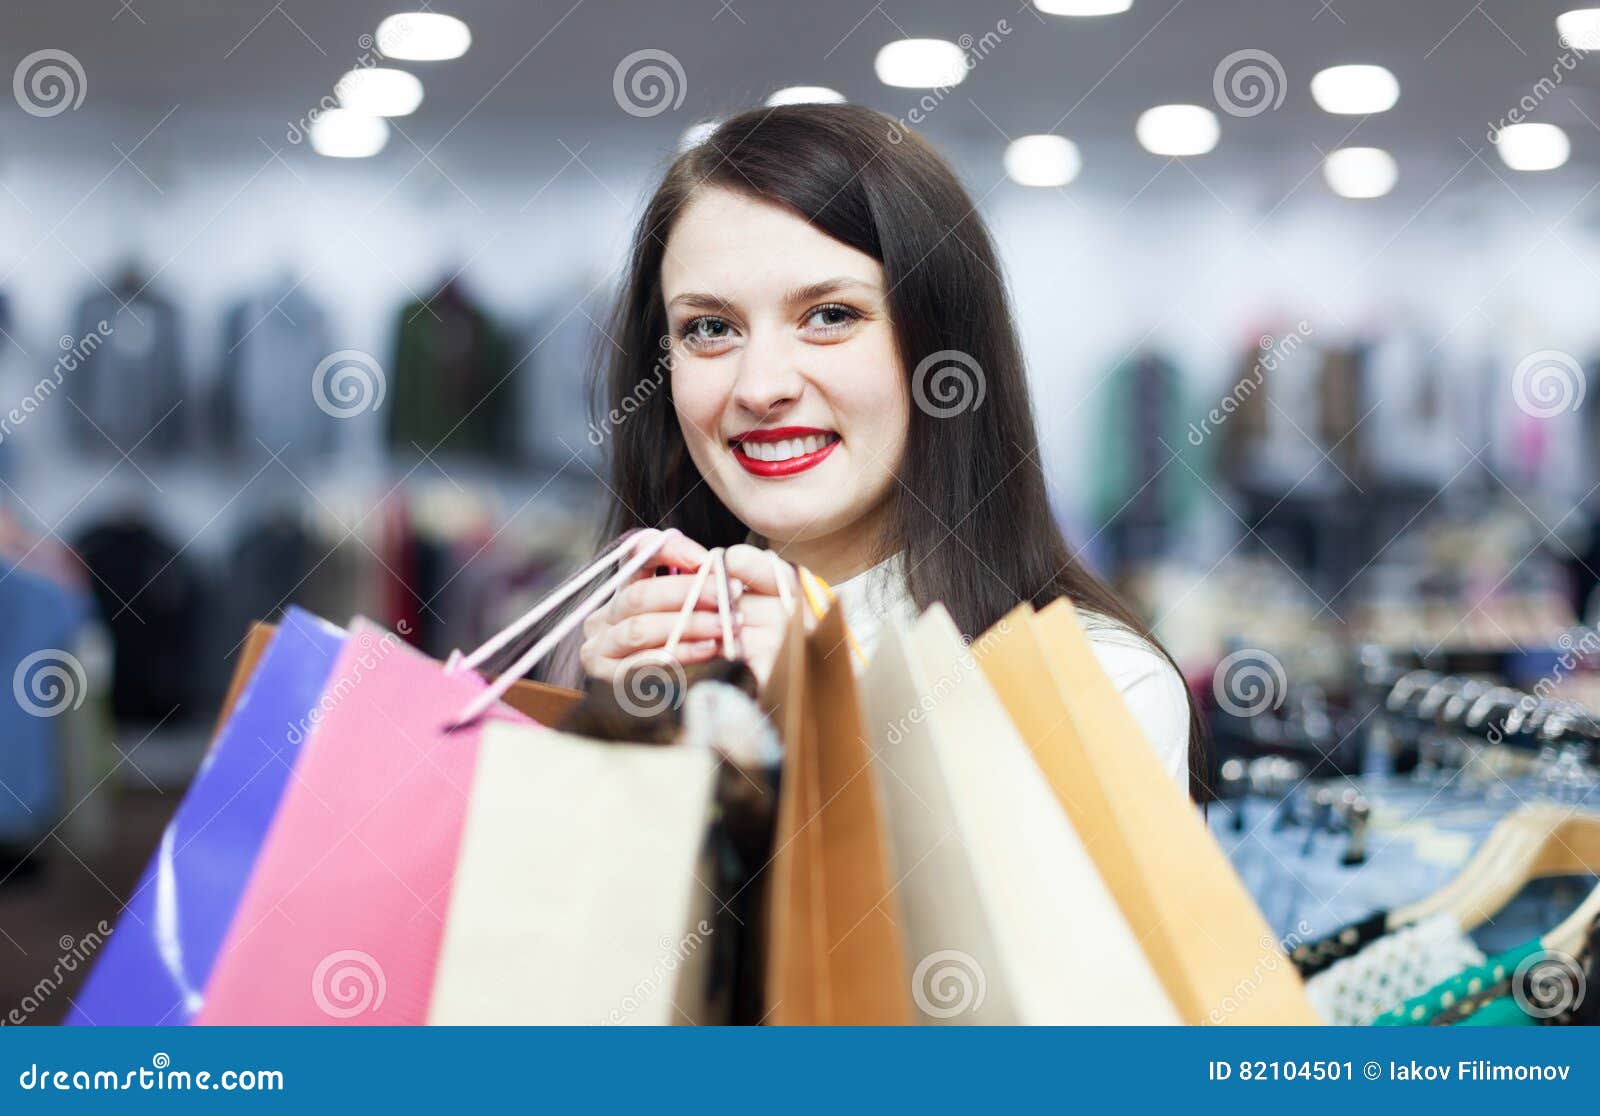 Portrait of Ordinary Female Buyer Stock Image - Image of cheerful ...